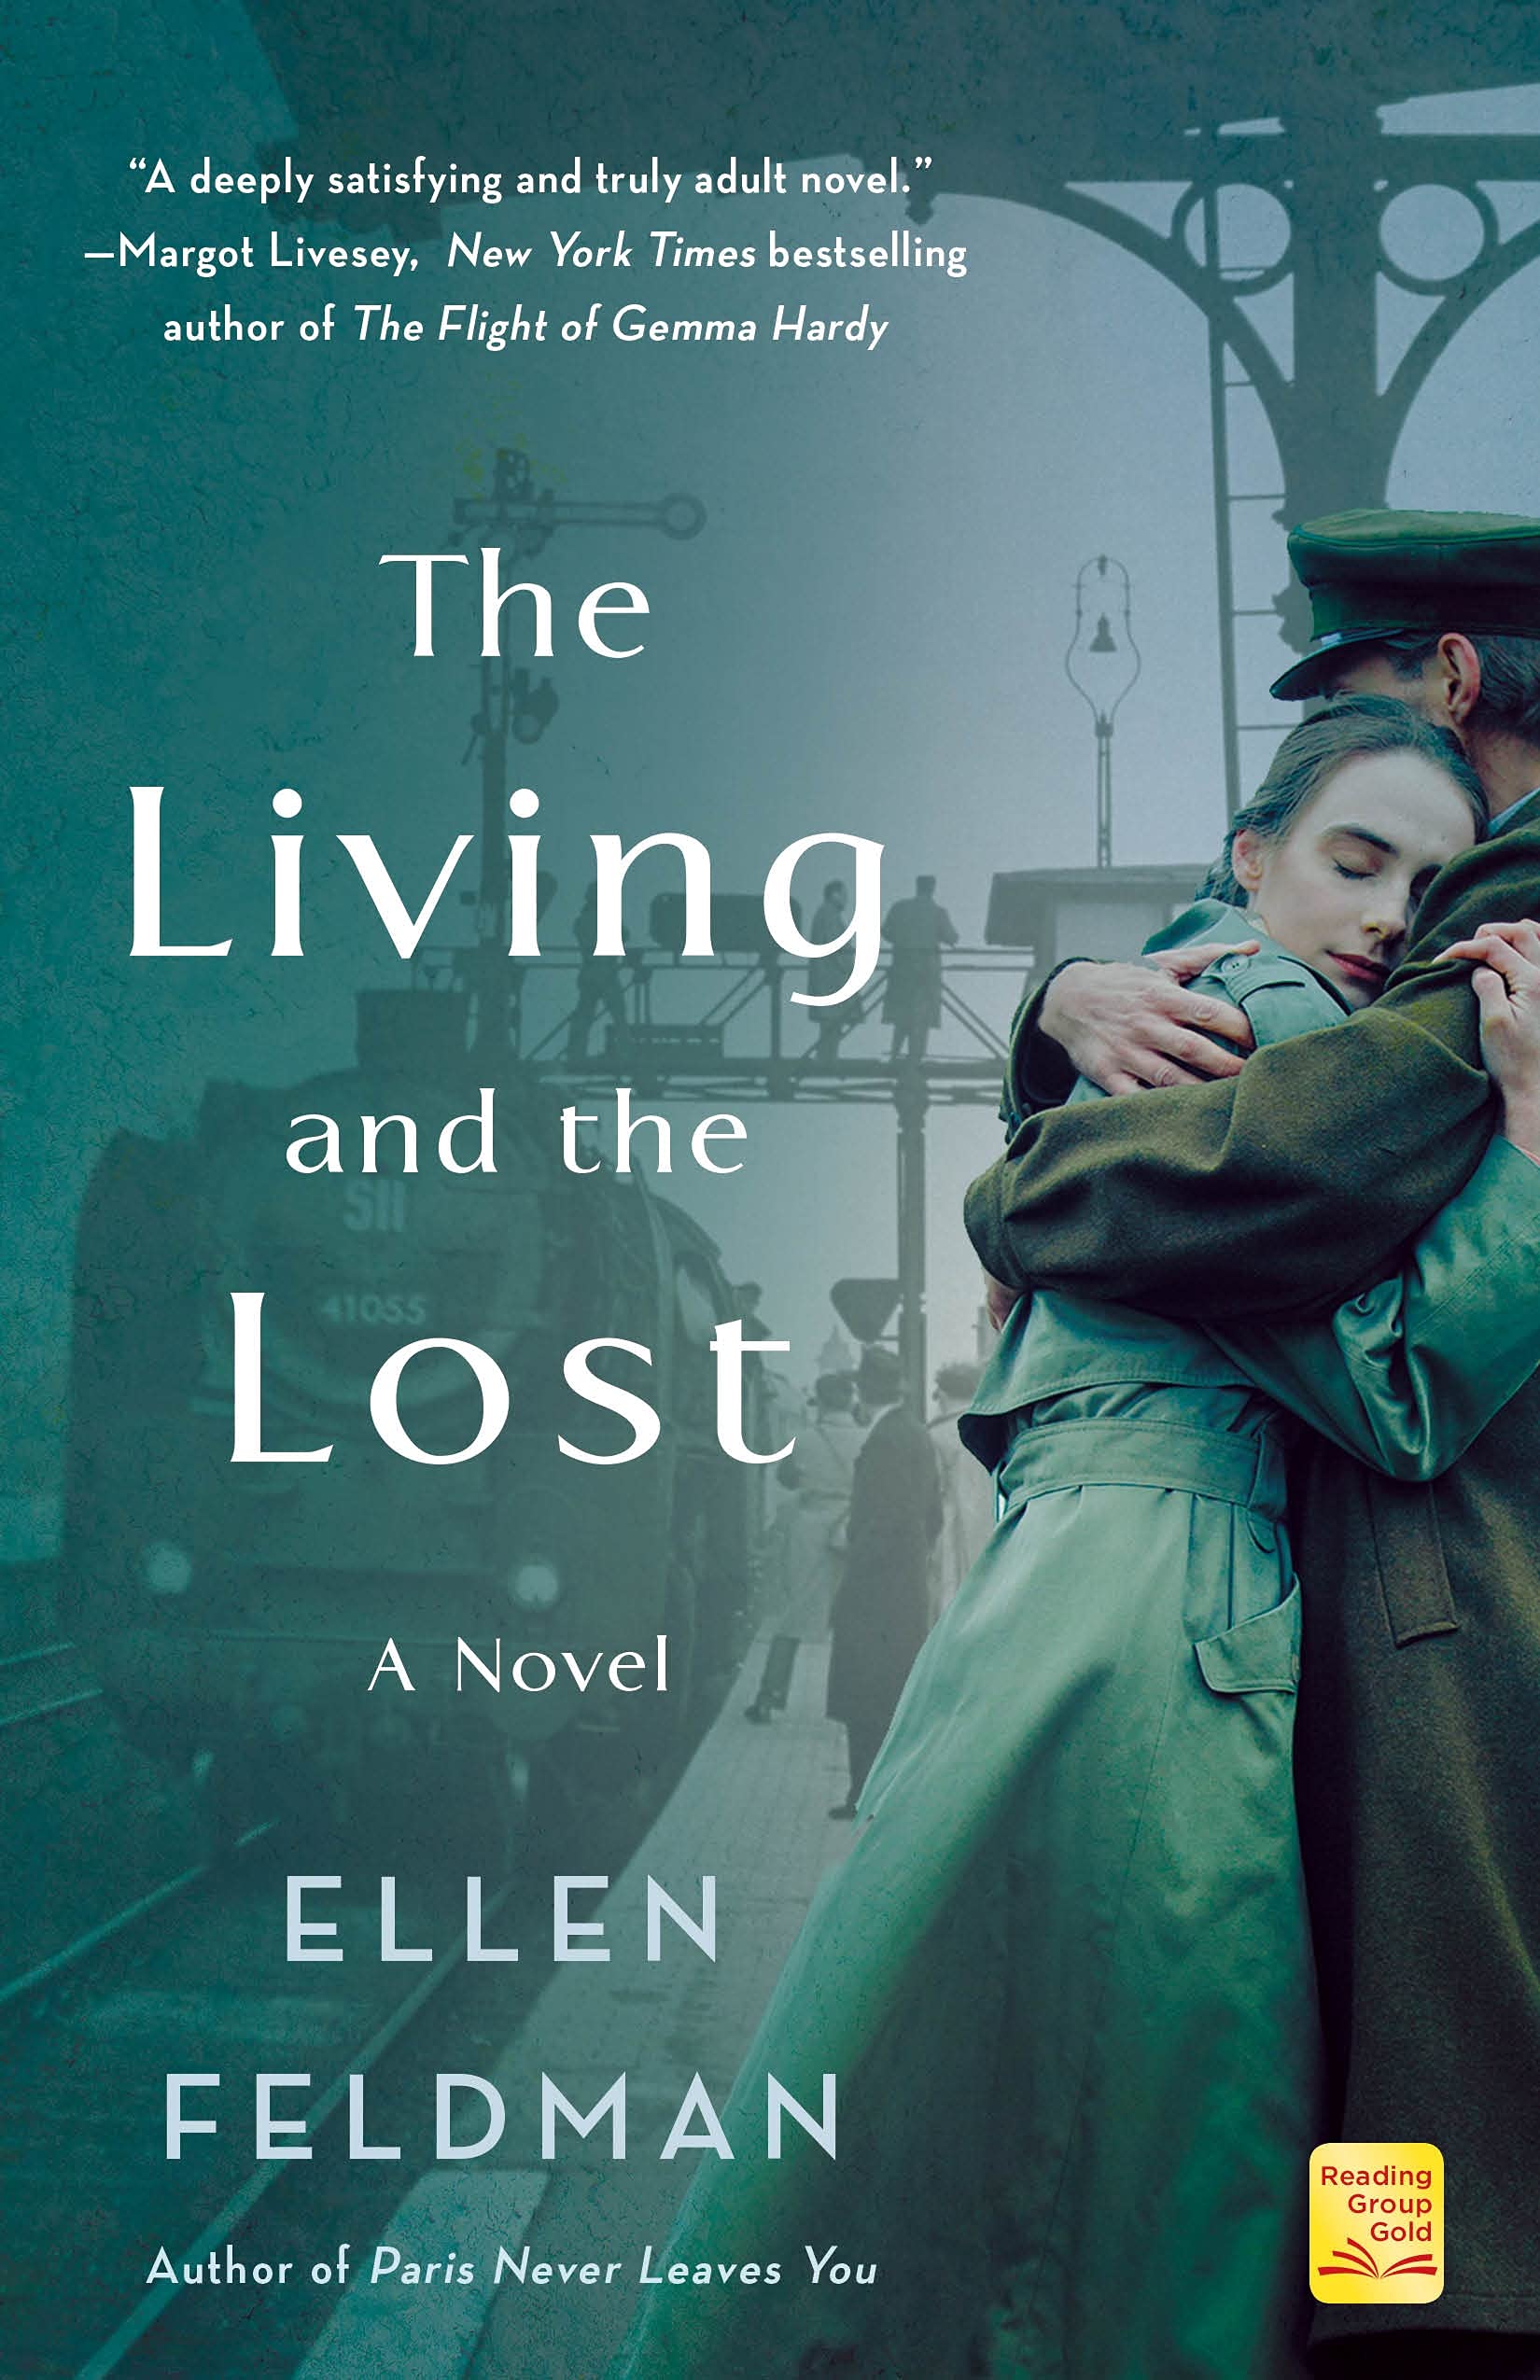 Book Cover for the book The Living and the Lost by Ellen Feldman (Long Island Reads Book 2022) Image of a man in military uniform embracing a woman in a long trench coat. 